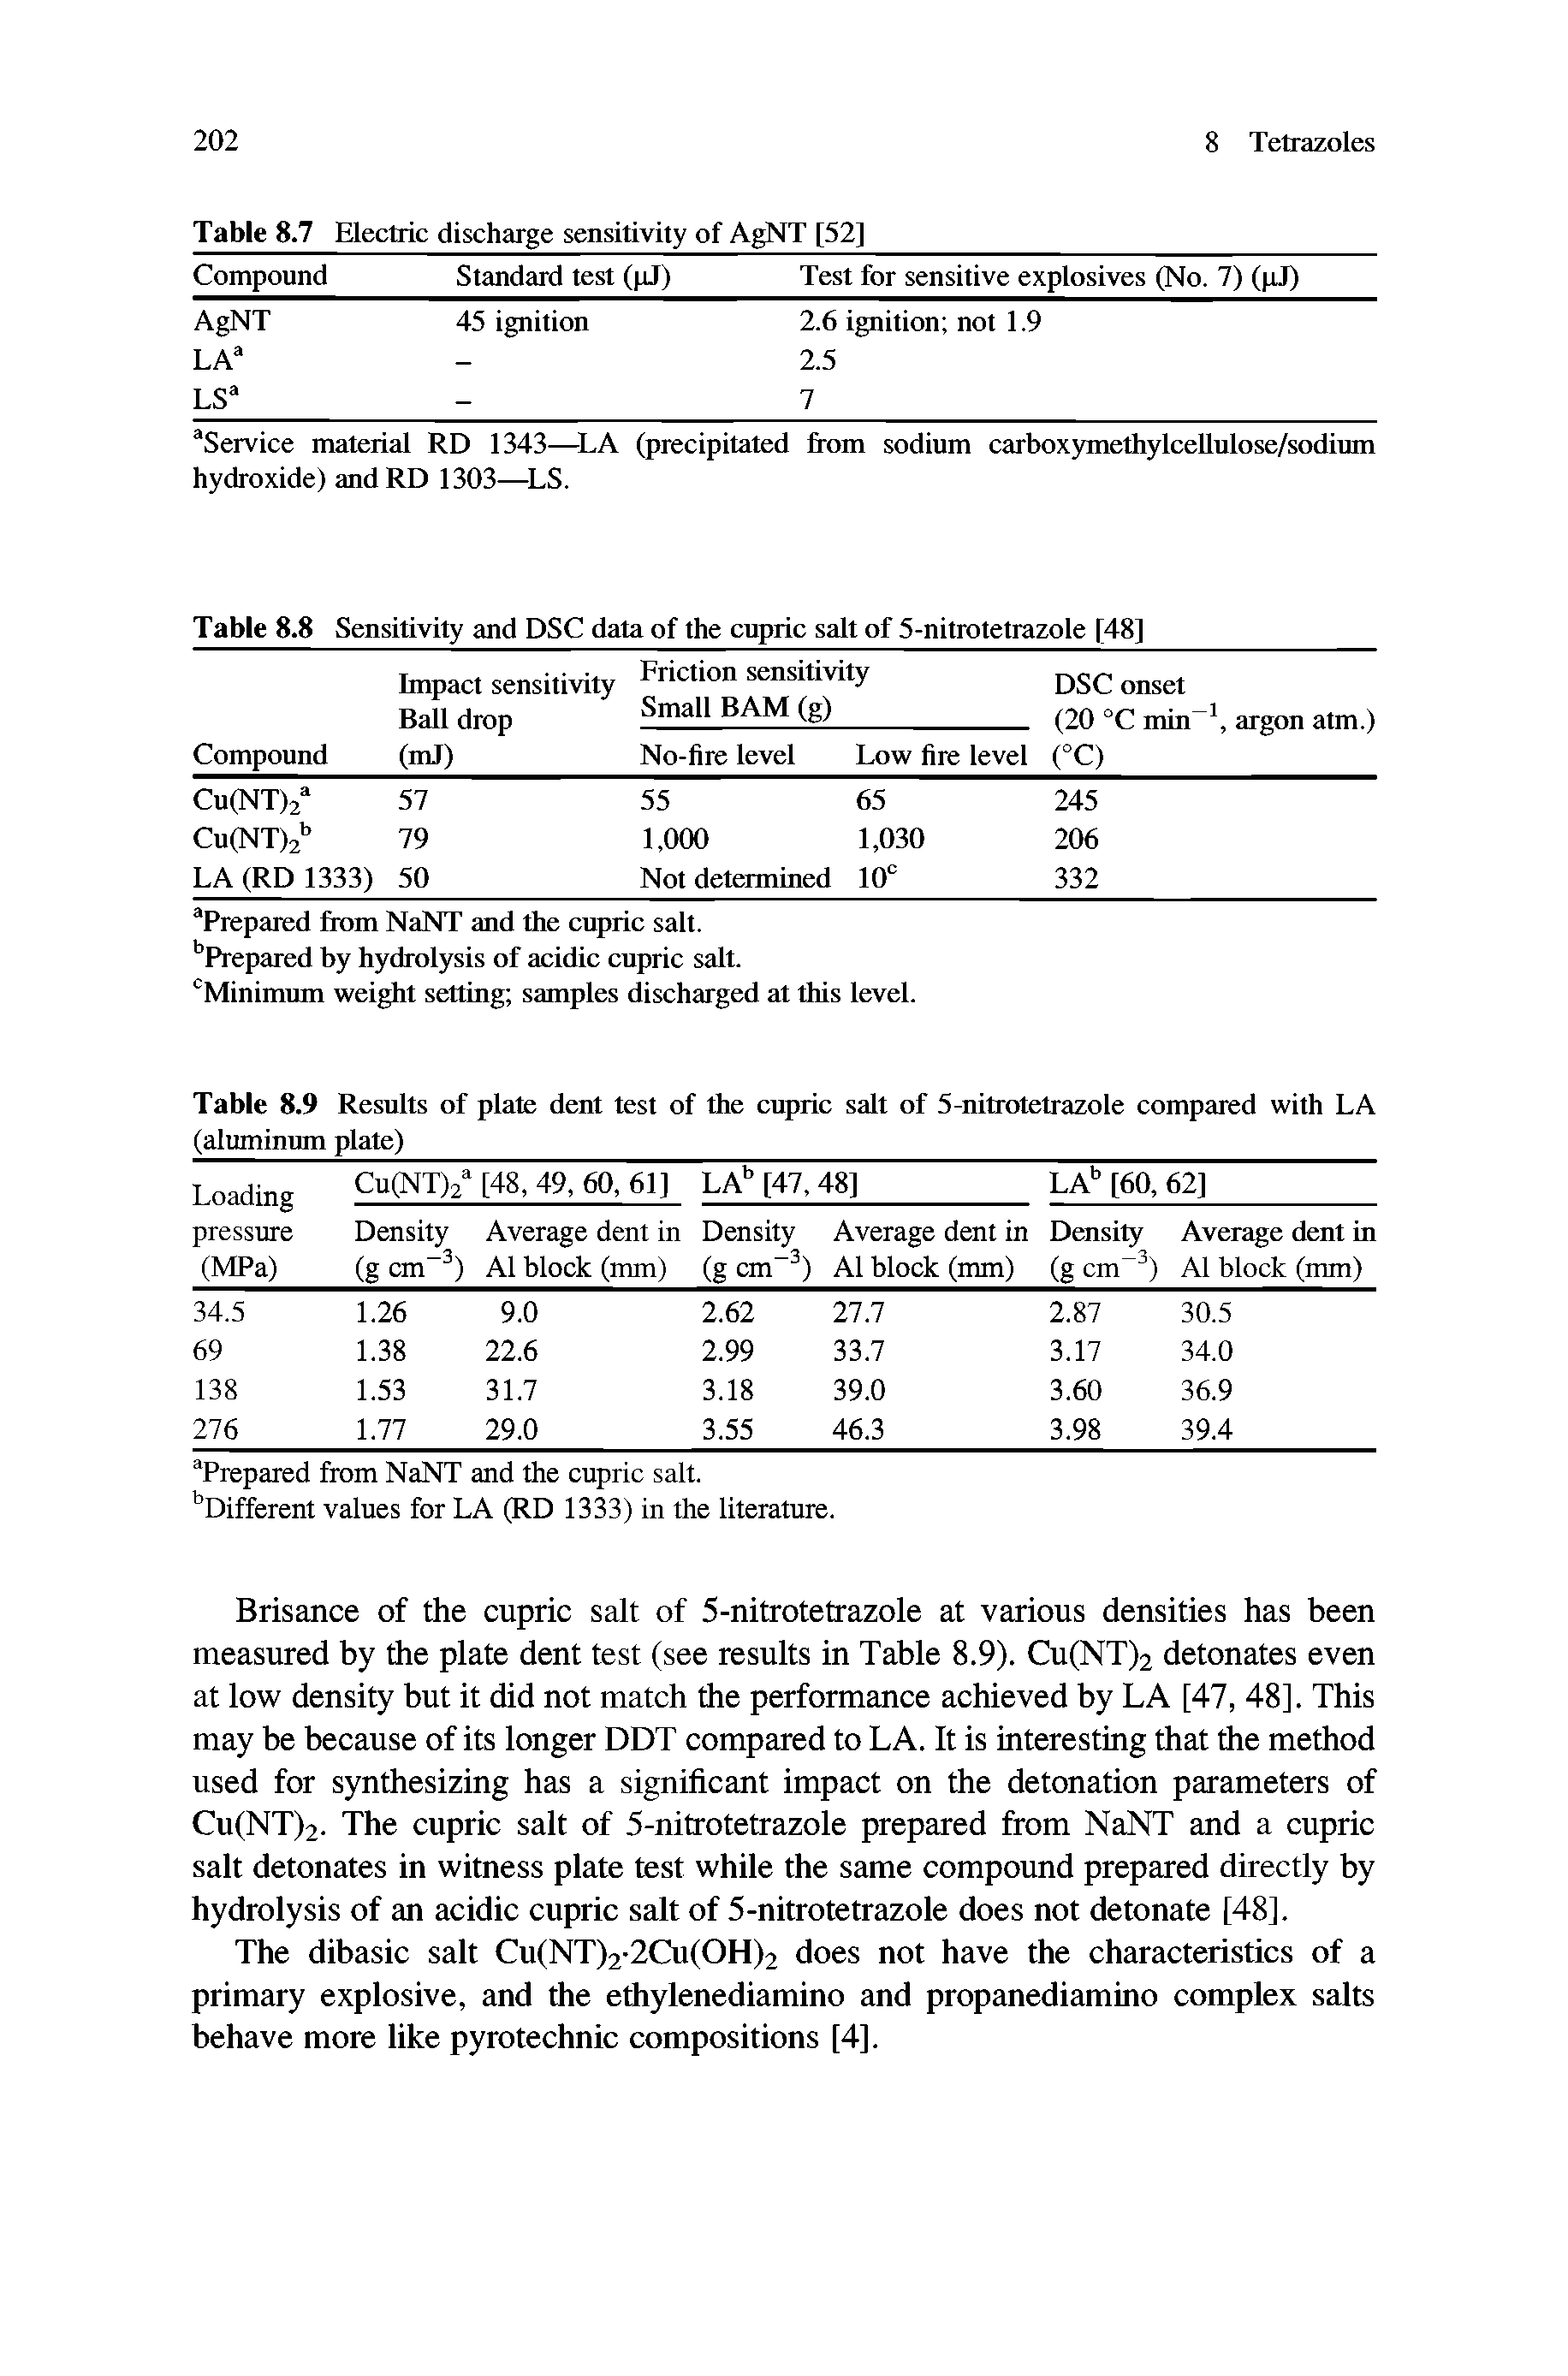 Table 8.8 Sensitivity and DSC data of the cupric salt of 5-nitrotetrazole [48]...